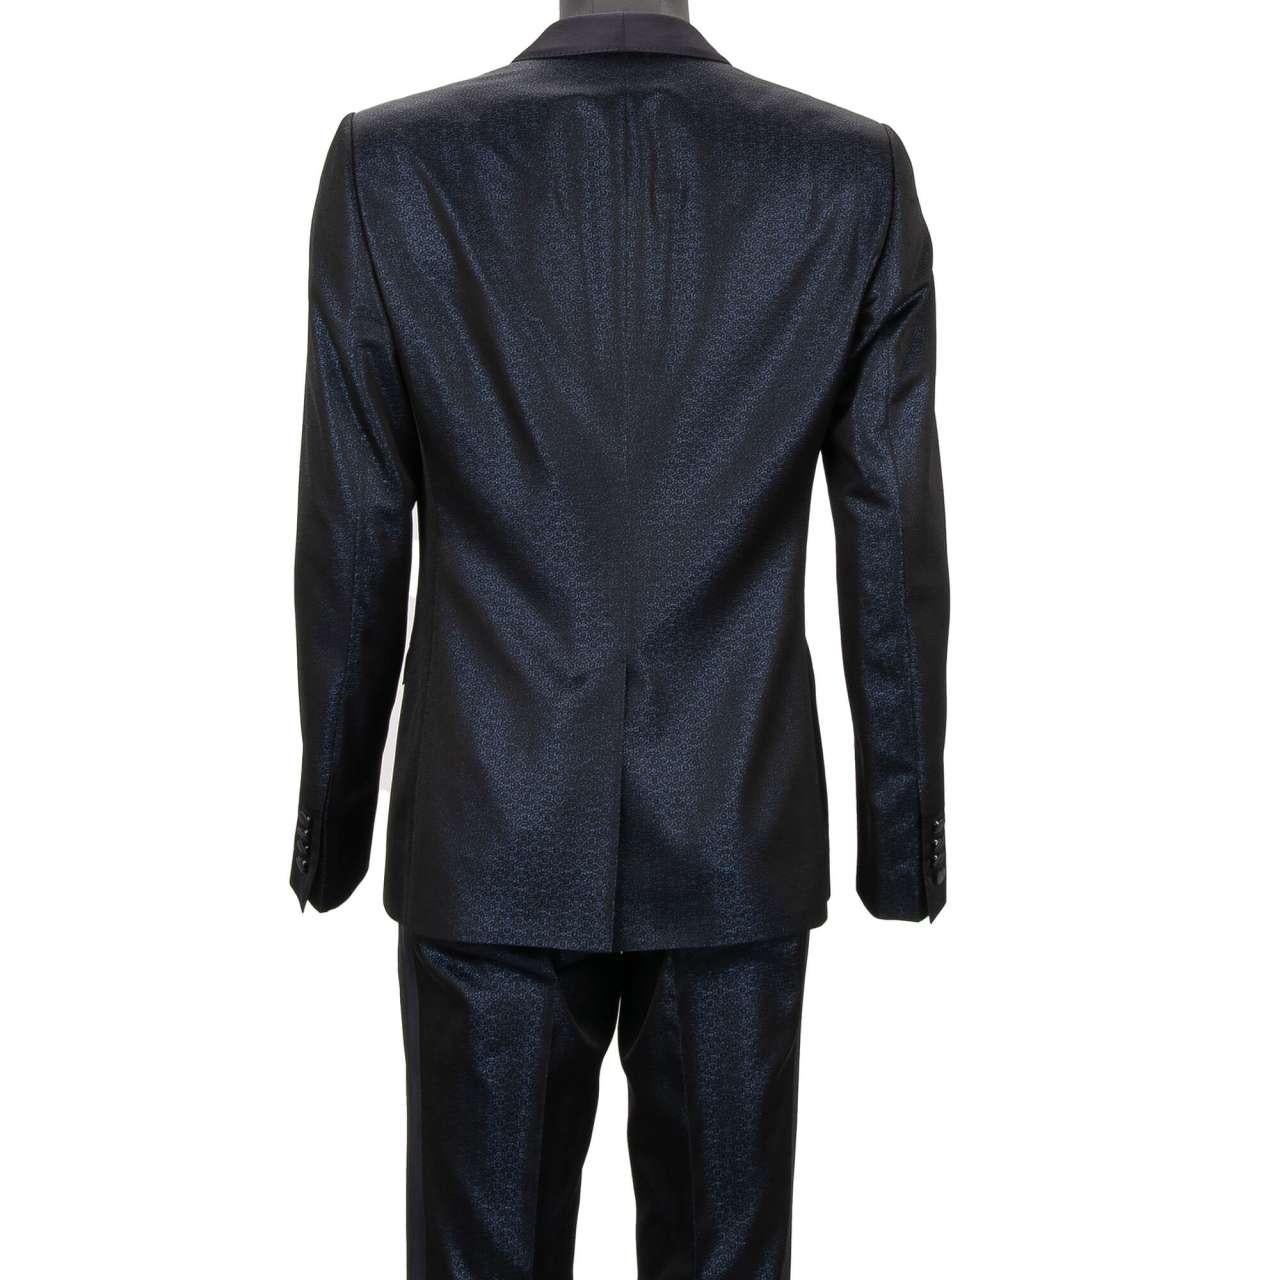 - Glitter Jacquard suit with silk shawl lapel in blue by DOLCE & GABBANA - GOLD Model - RUNWAY - Dolce & Gabbana Fashion Show - New with tag - Former RRP: EUR 2,150 - MADE in ITALY - Slim Fit - Model: GK1DMT-FJM53-S8351 - Material: 58% Acetate, 22%